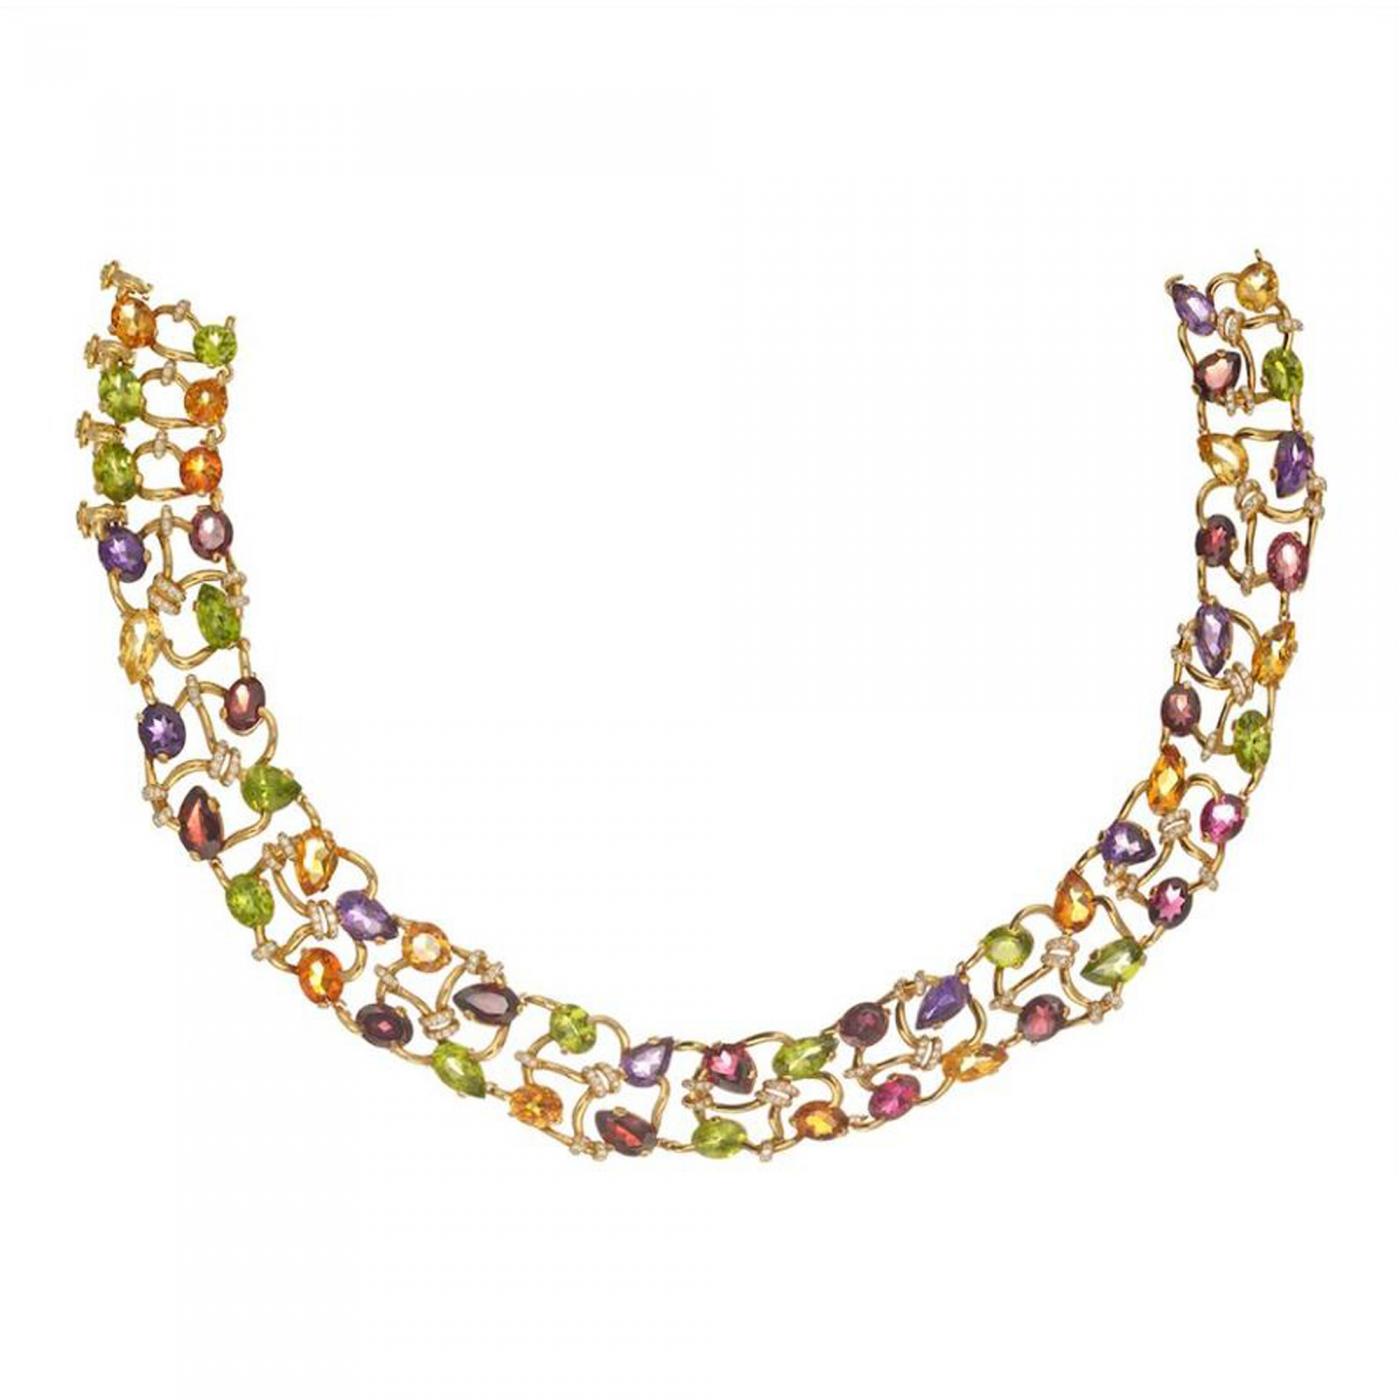 Chanel - CHANEL 18K YELLOW GOLD MULTICOLOR GEMSTONE AND DIAMOND COLLAR  NECKLACE